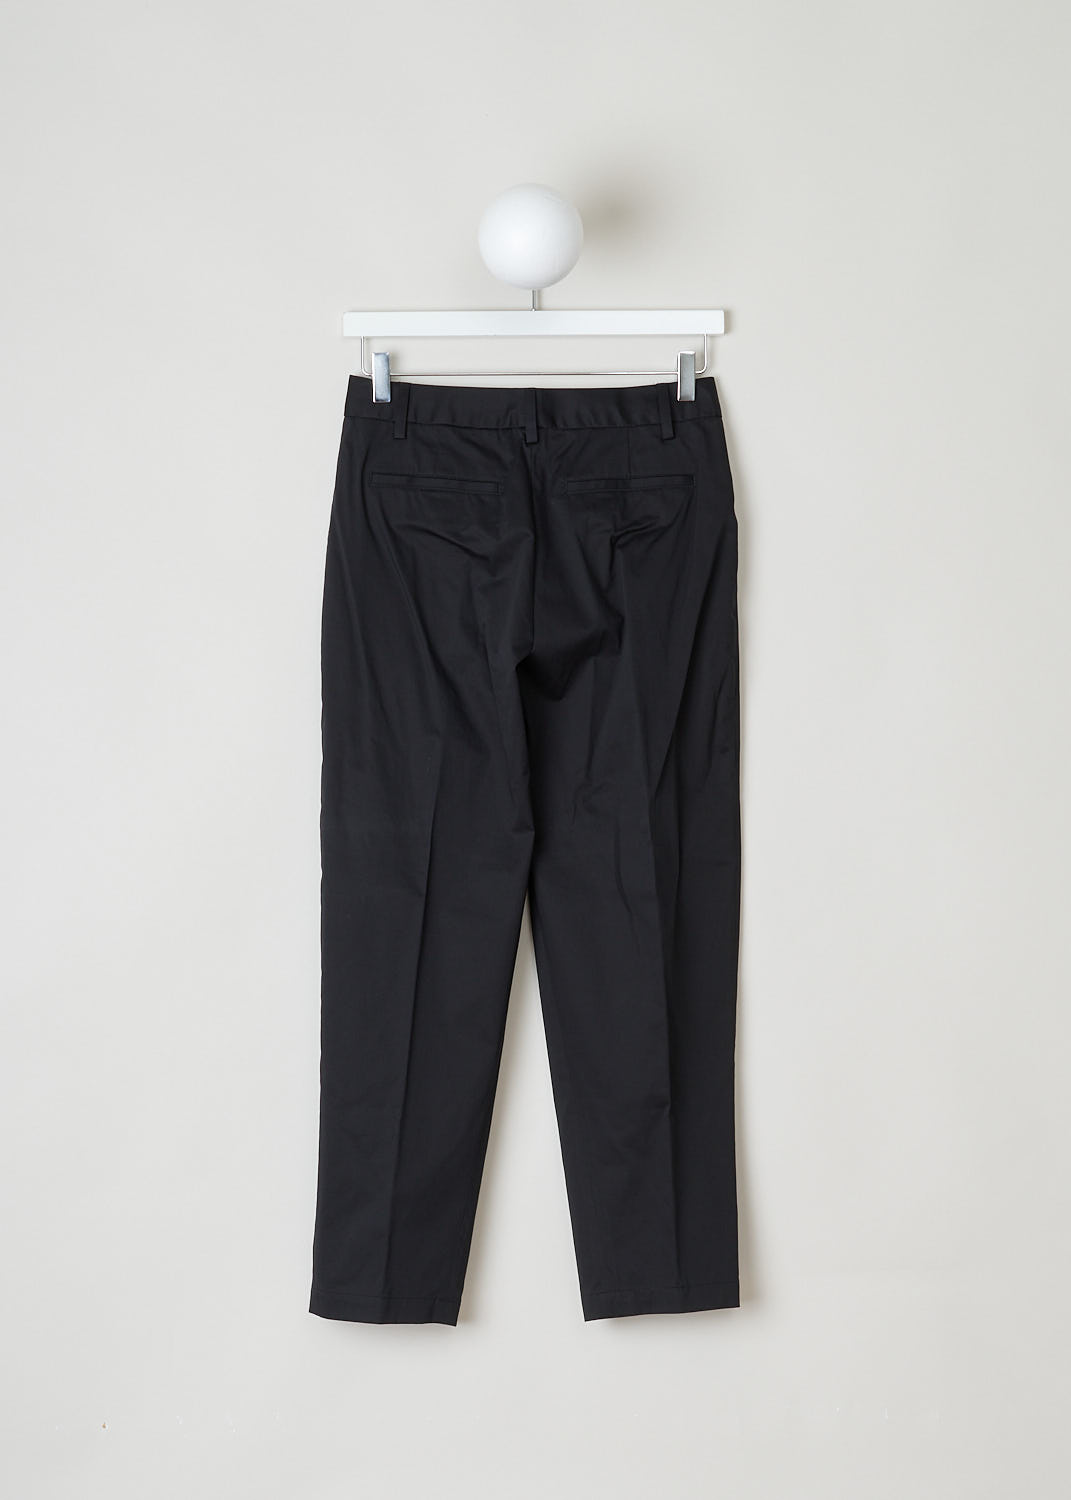 CLOSED, STURDY BLACK TROUSERS, LUDWIG_C91045_31S_22_100, Black, Back, These sturdy black trousers feature a regular length, a concealed clasp and zipper, two forward slanted pockets on the front and two welt pockets on the back.